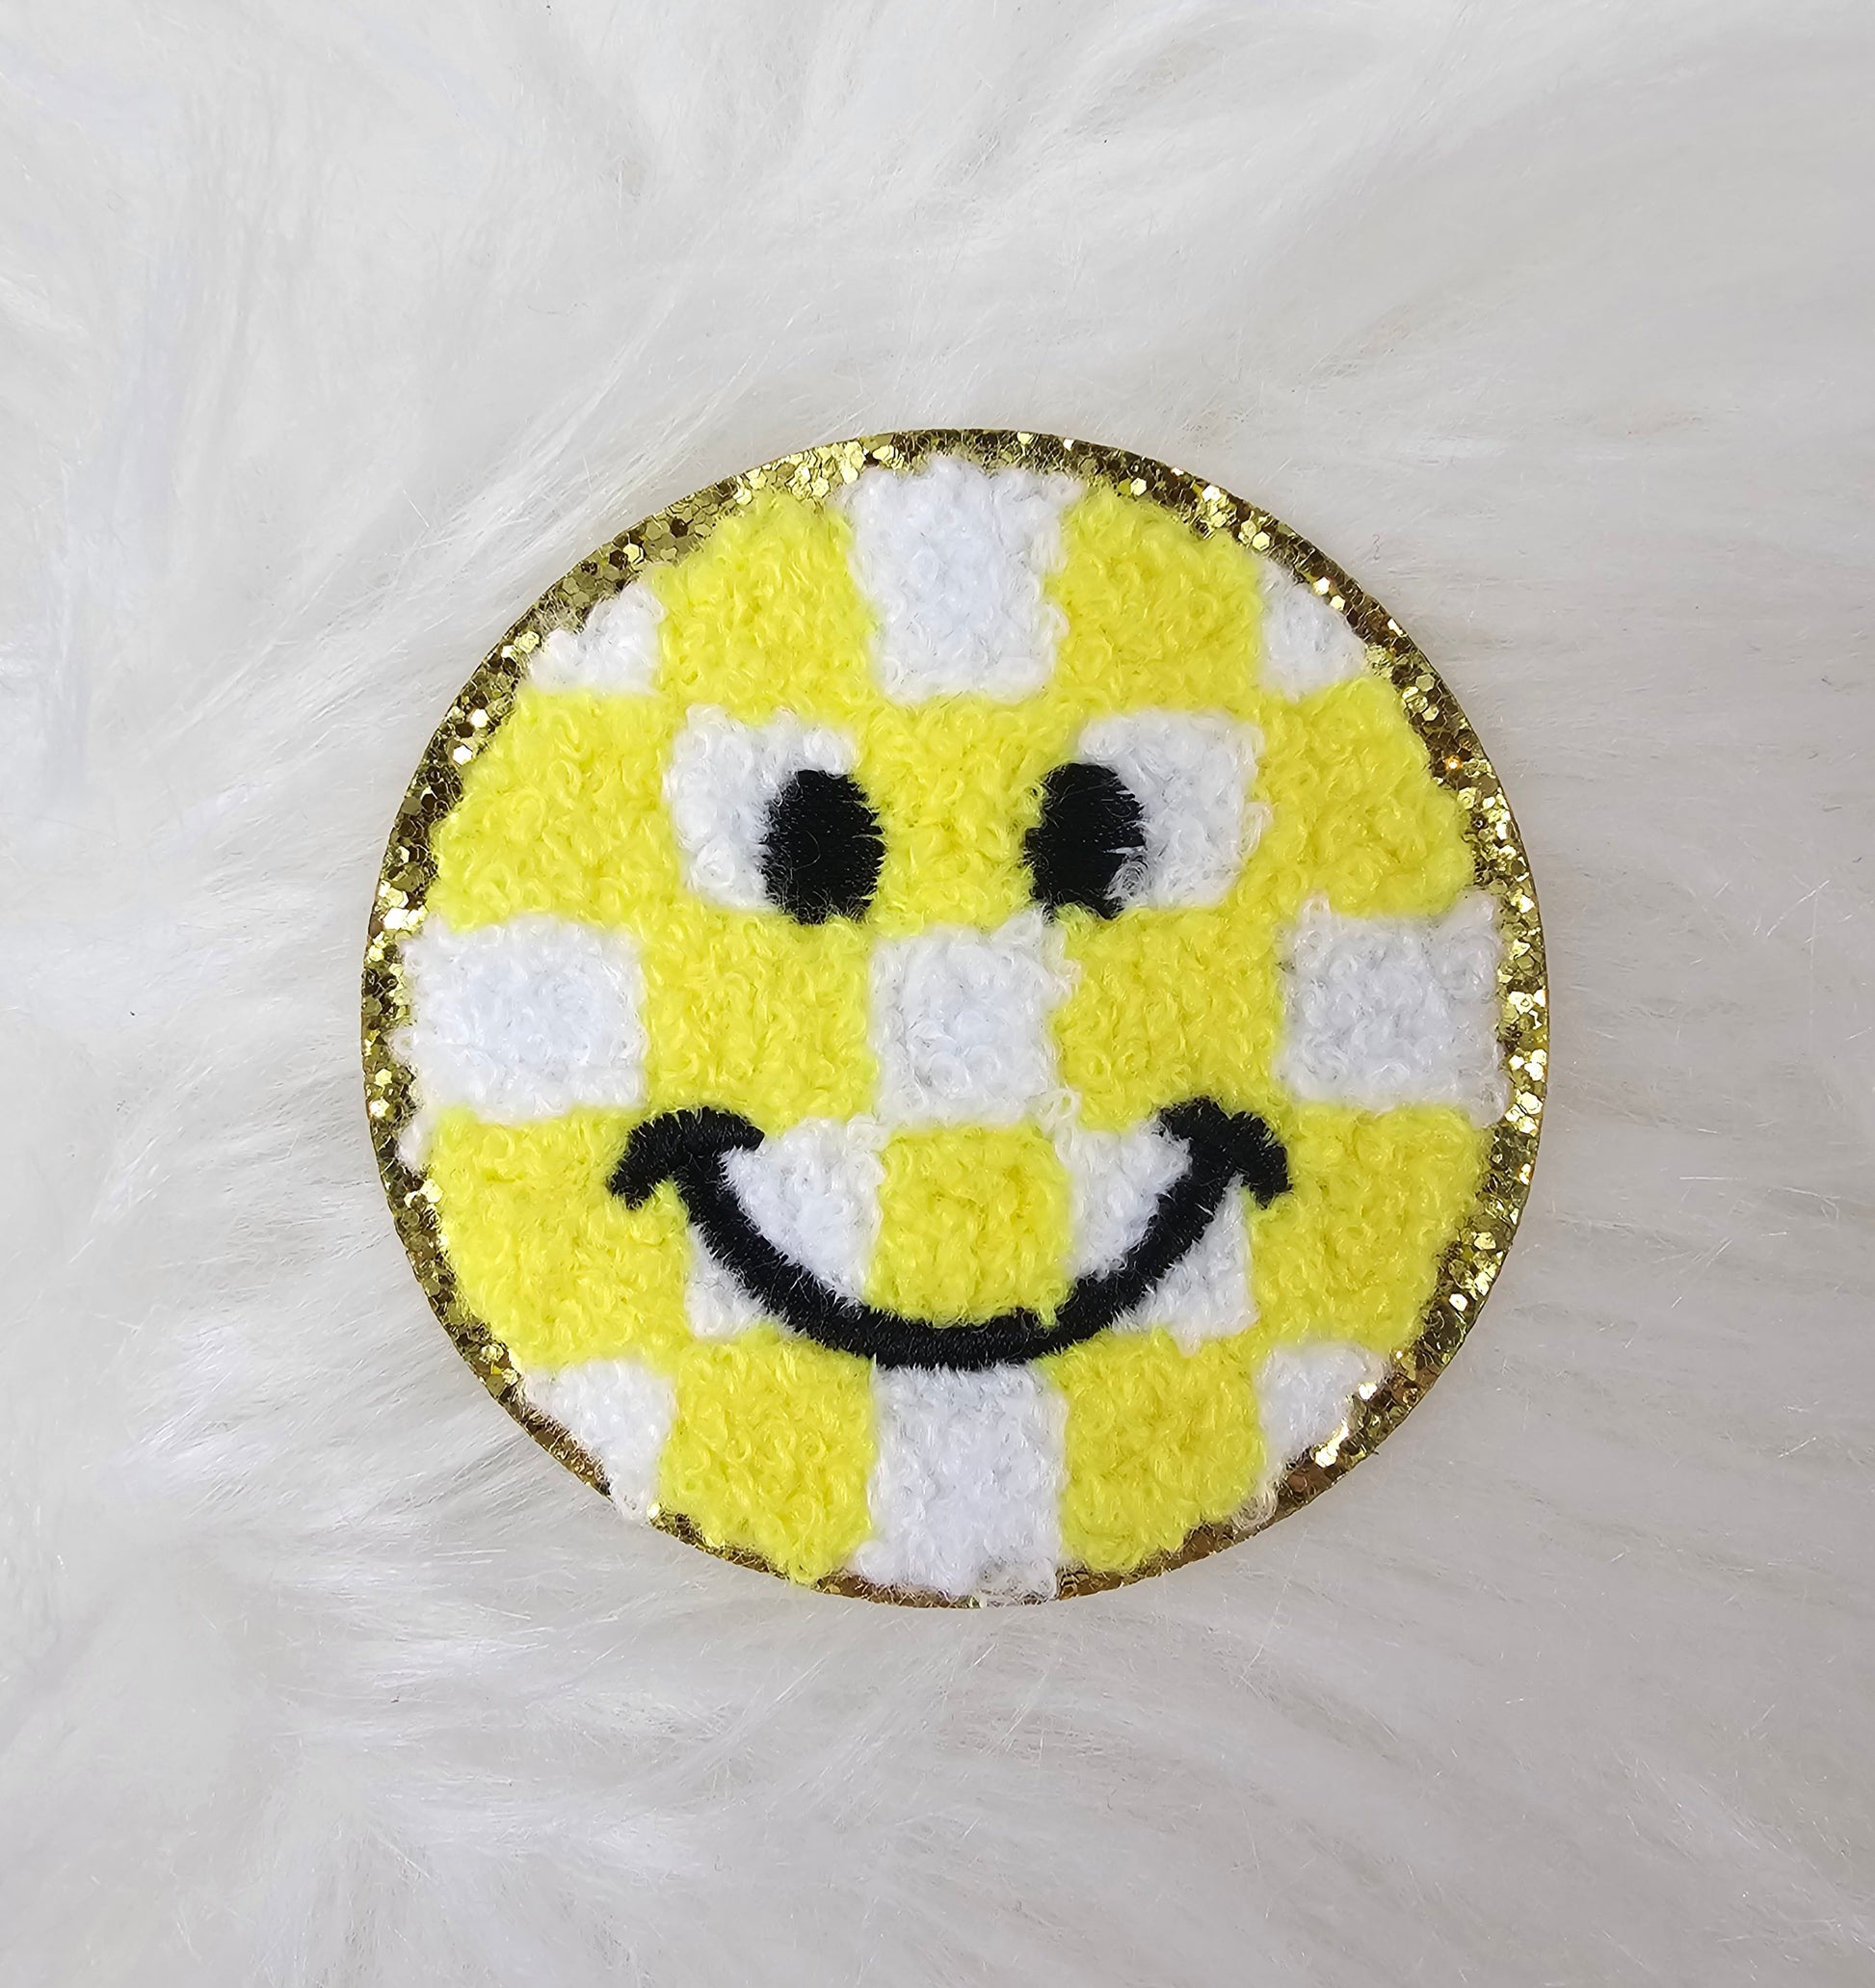 SMILEY FACE PATCH